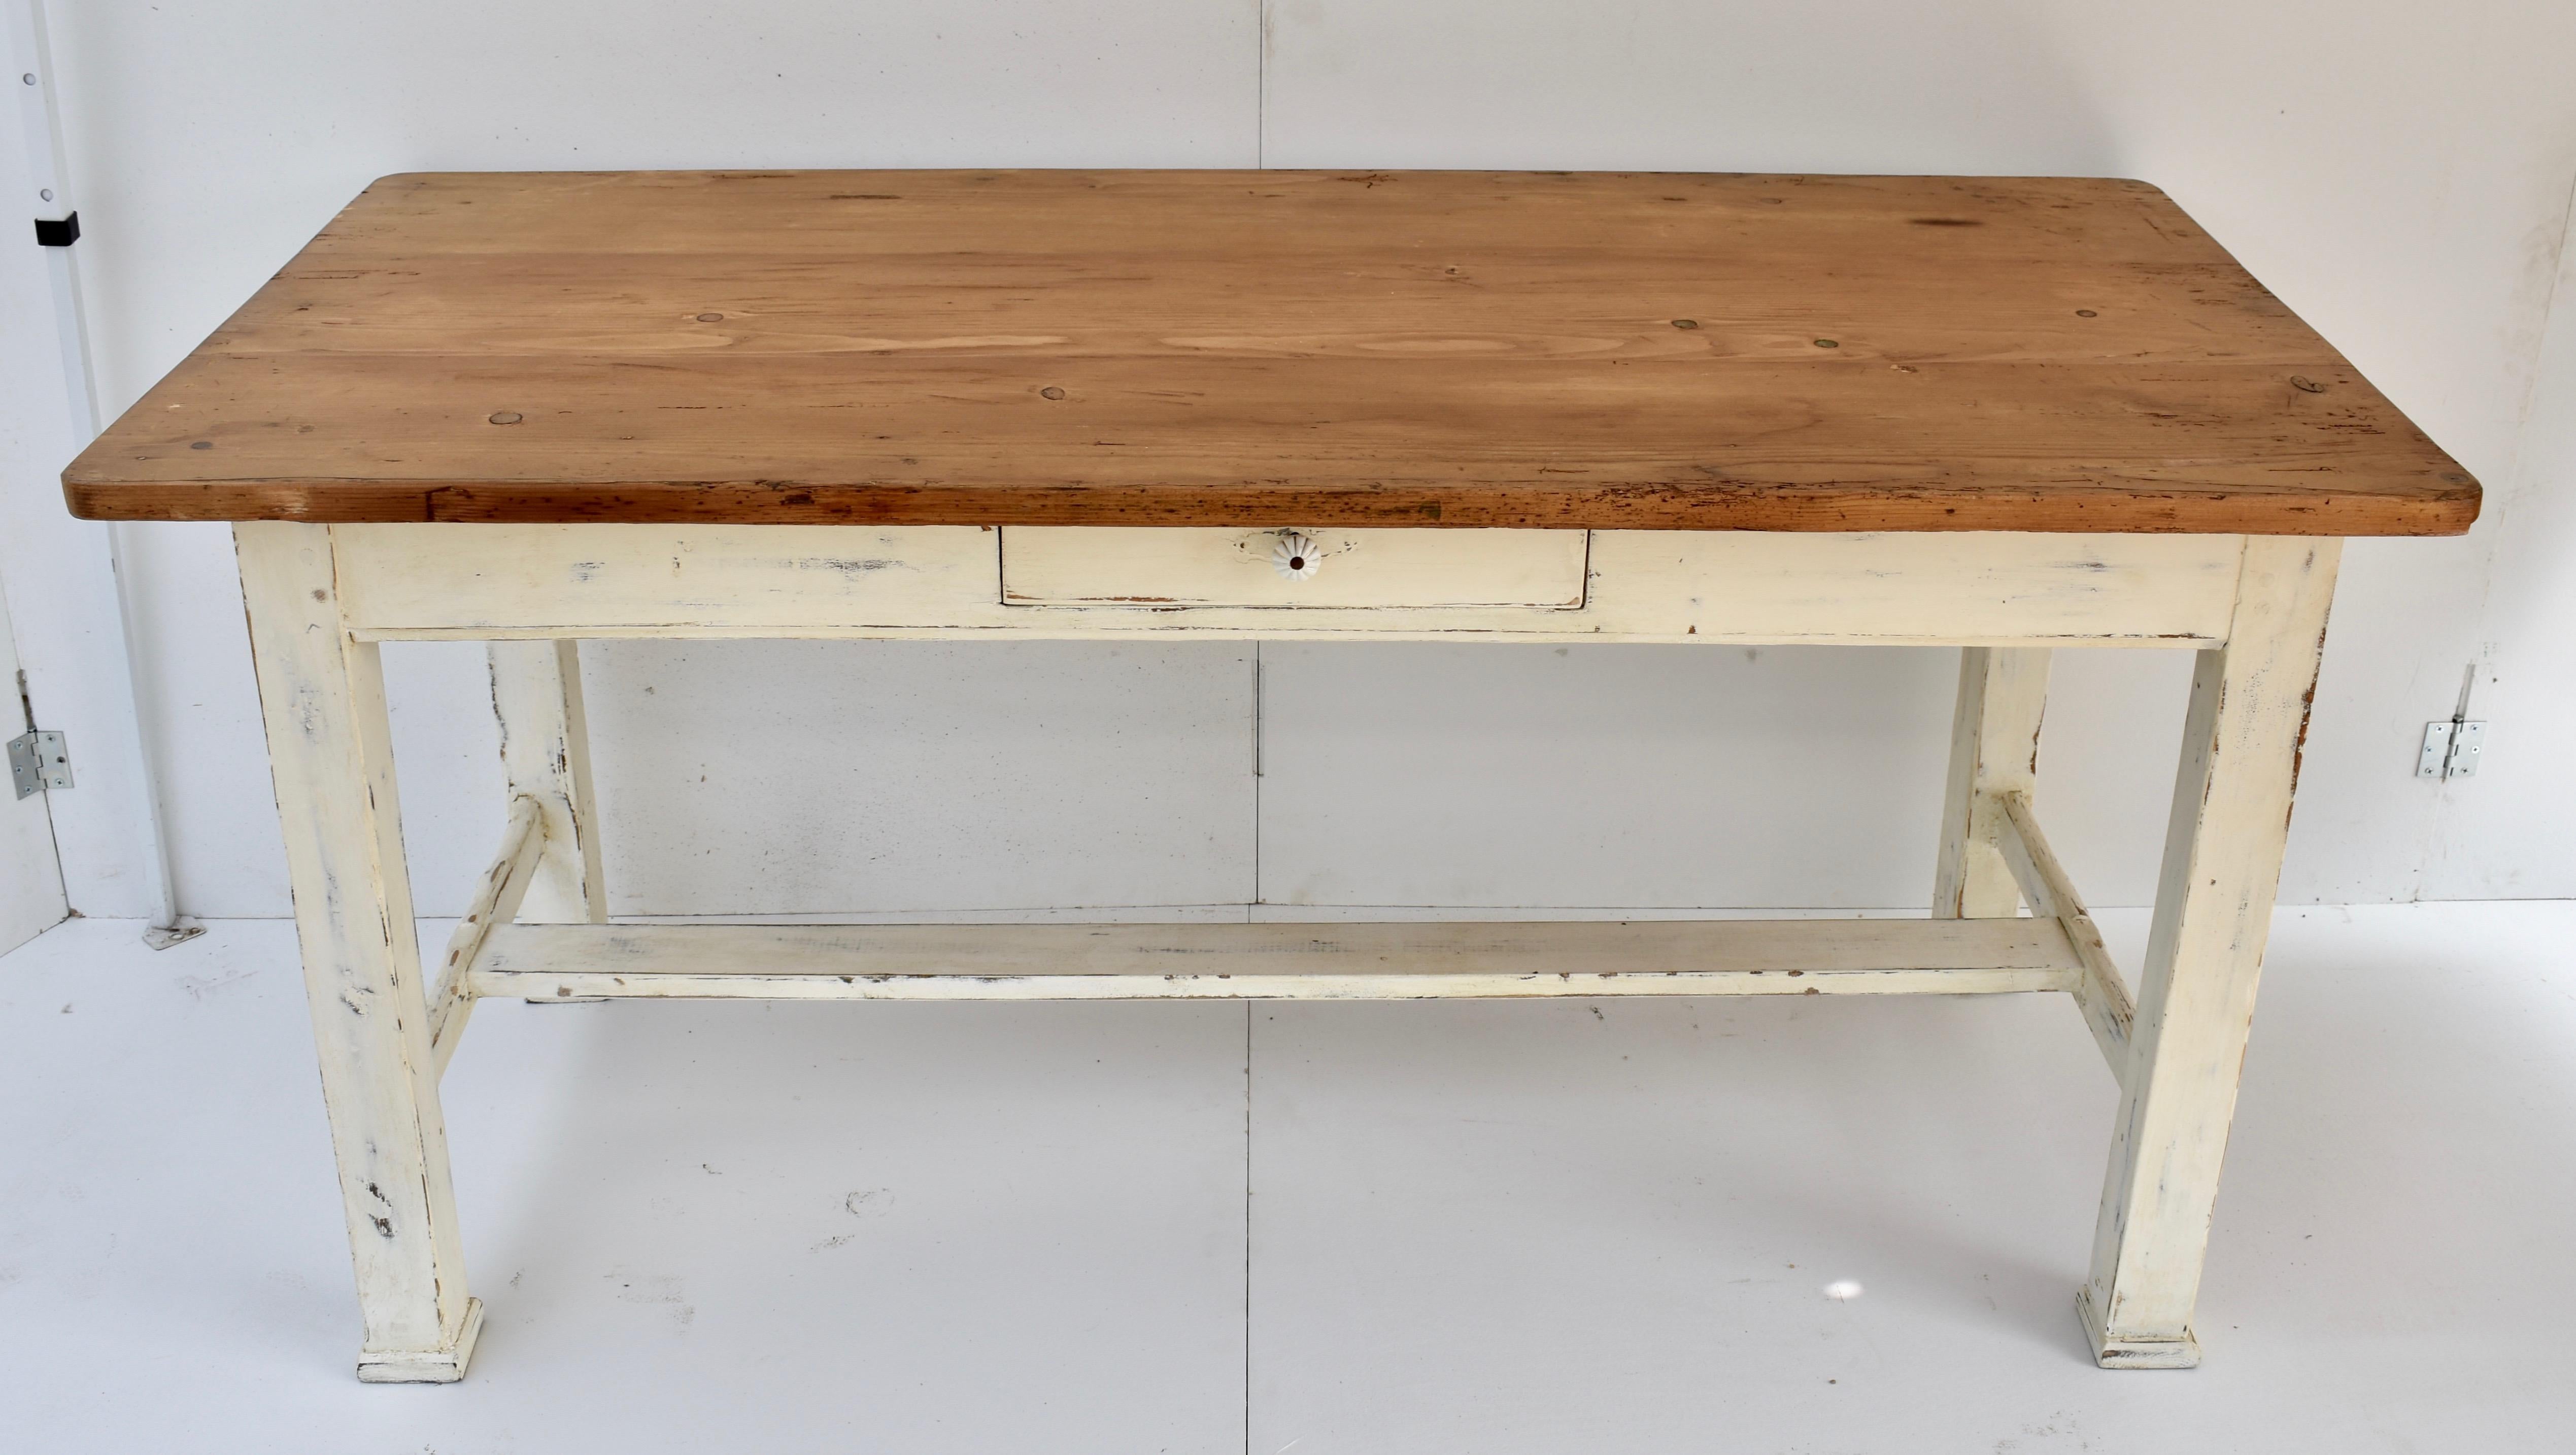 This attractive farmhouse table has a thick richly-colored pine top, sturdy 3” square legs joined by well-worn stretchers and a single central hand-cut dovetailed drawer with a traditional ceramic knob. In old white paint worn through to blue and to